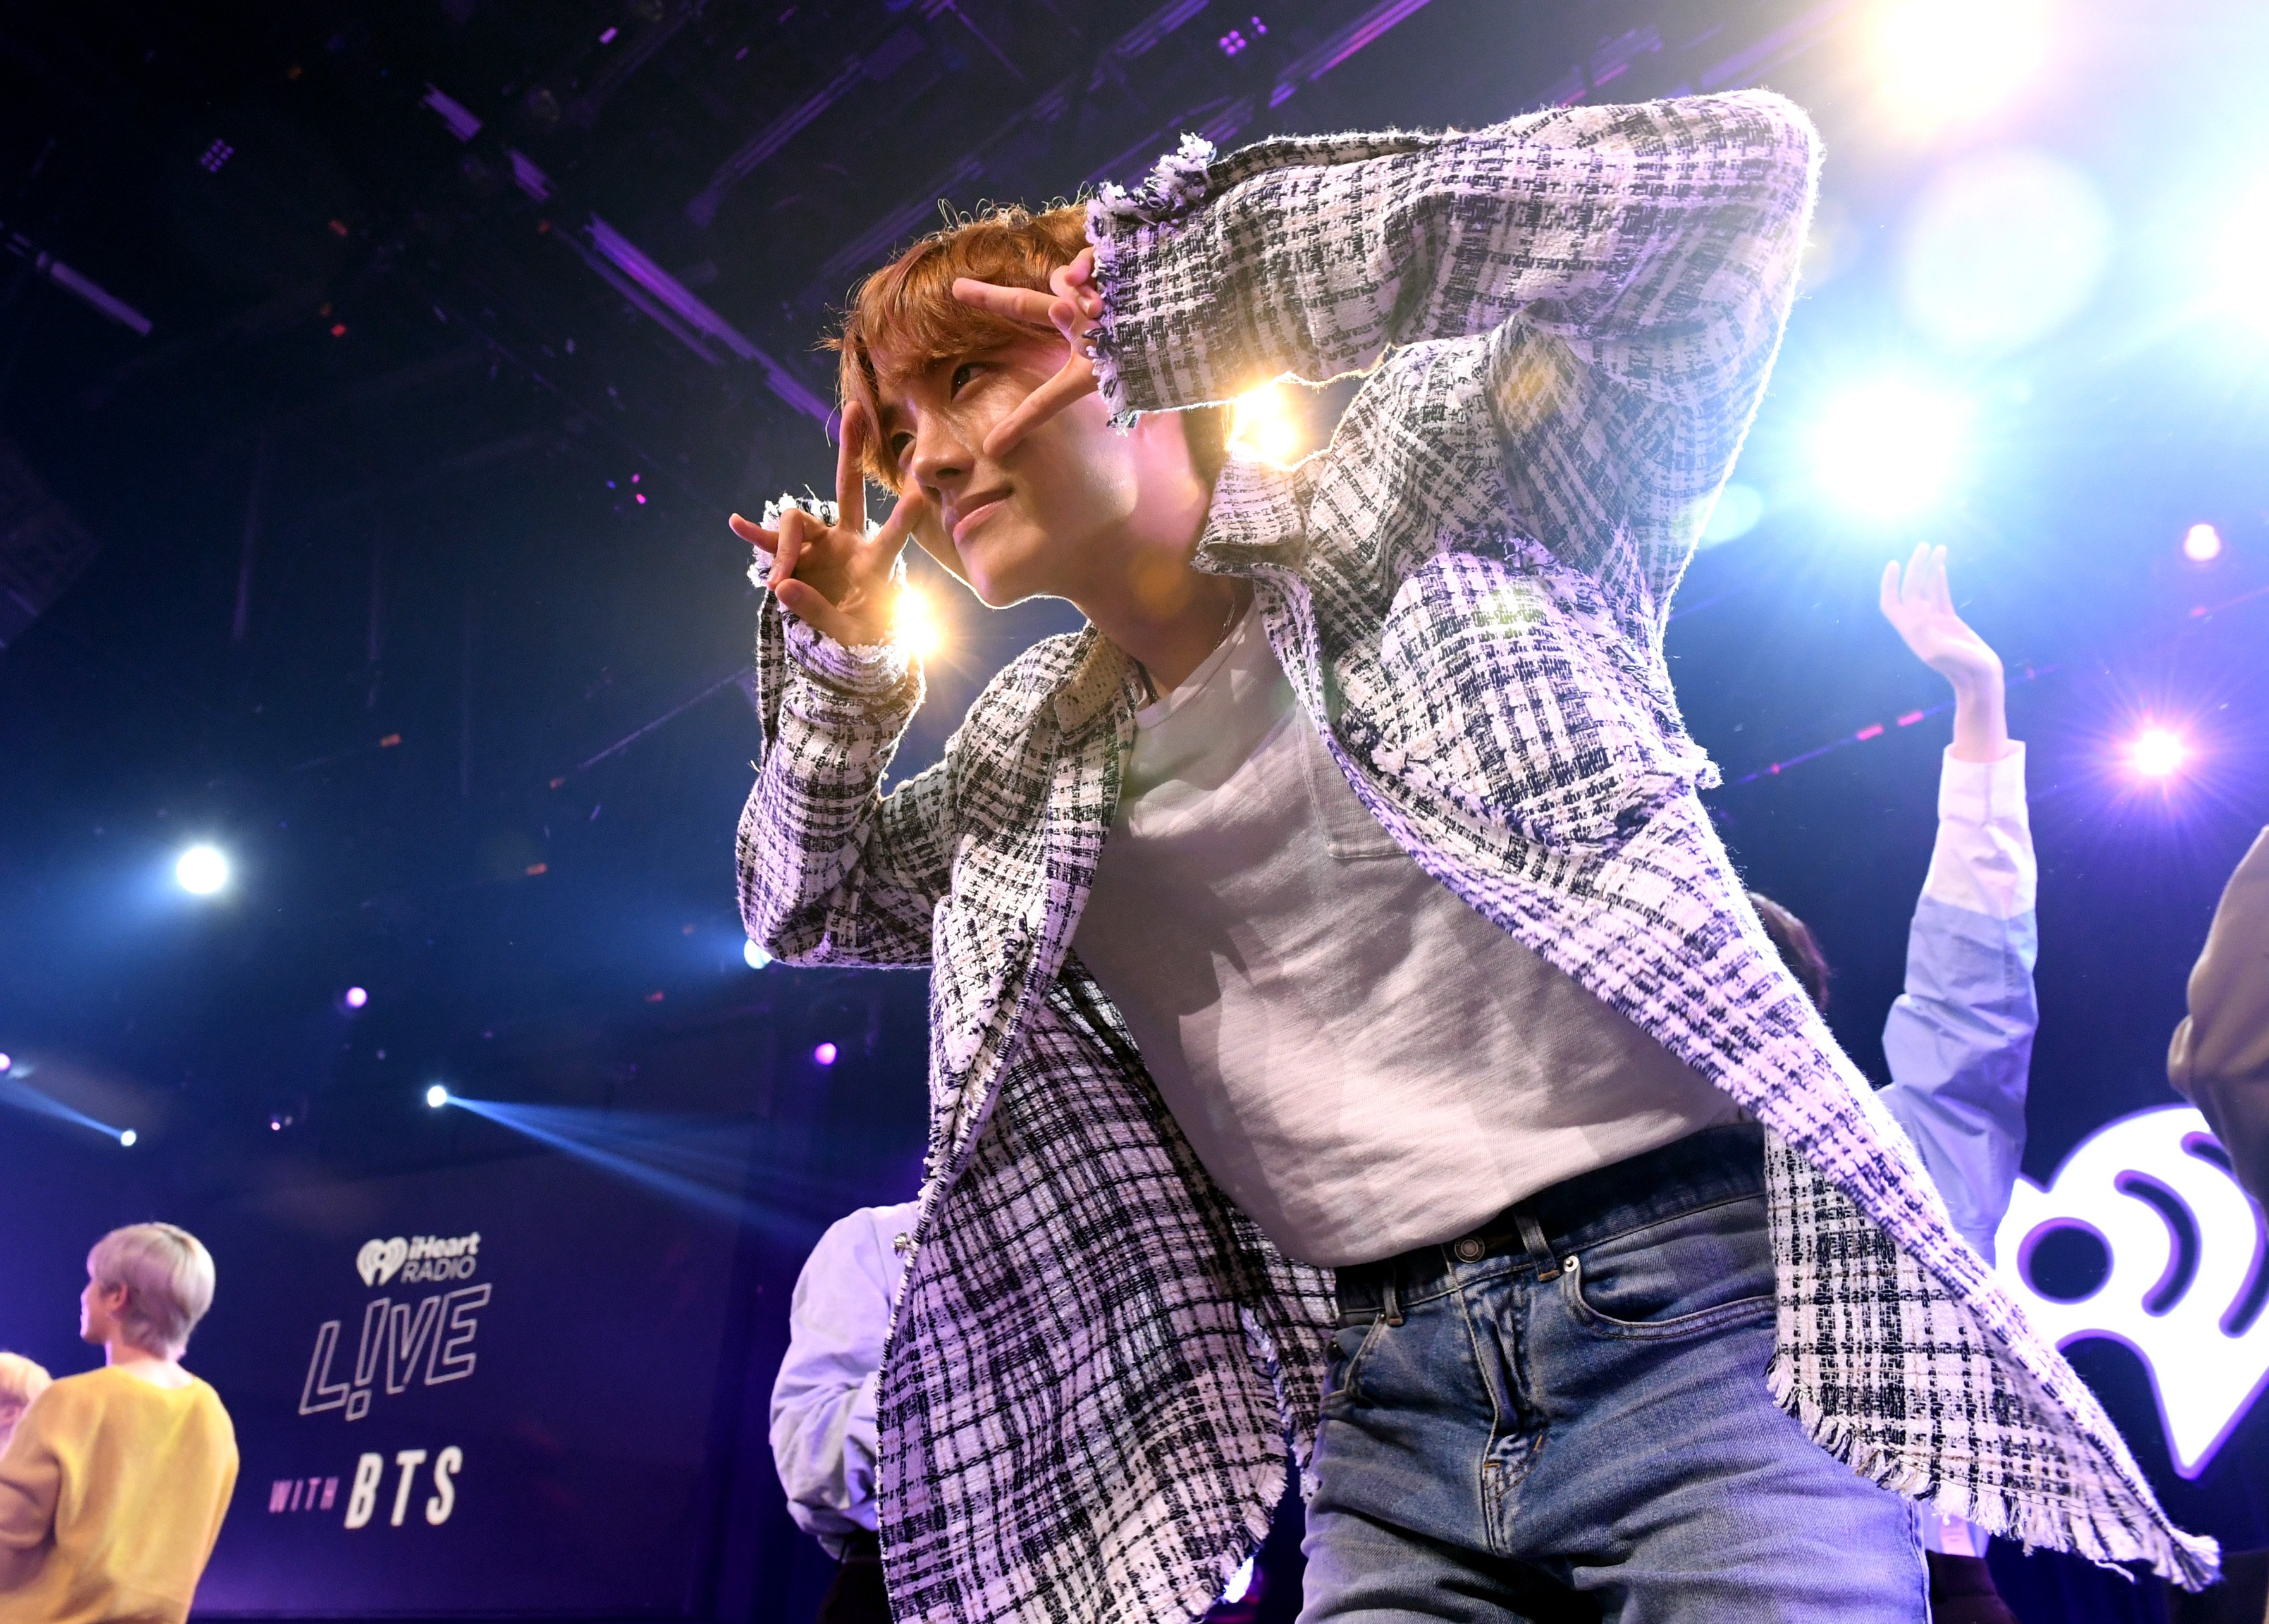 J-Hope of 'BTS' onstage at iHeartRadio LIVE with BTS presented by HOT TOPIC